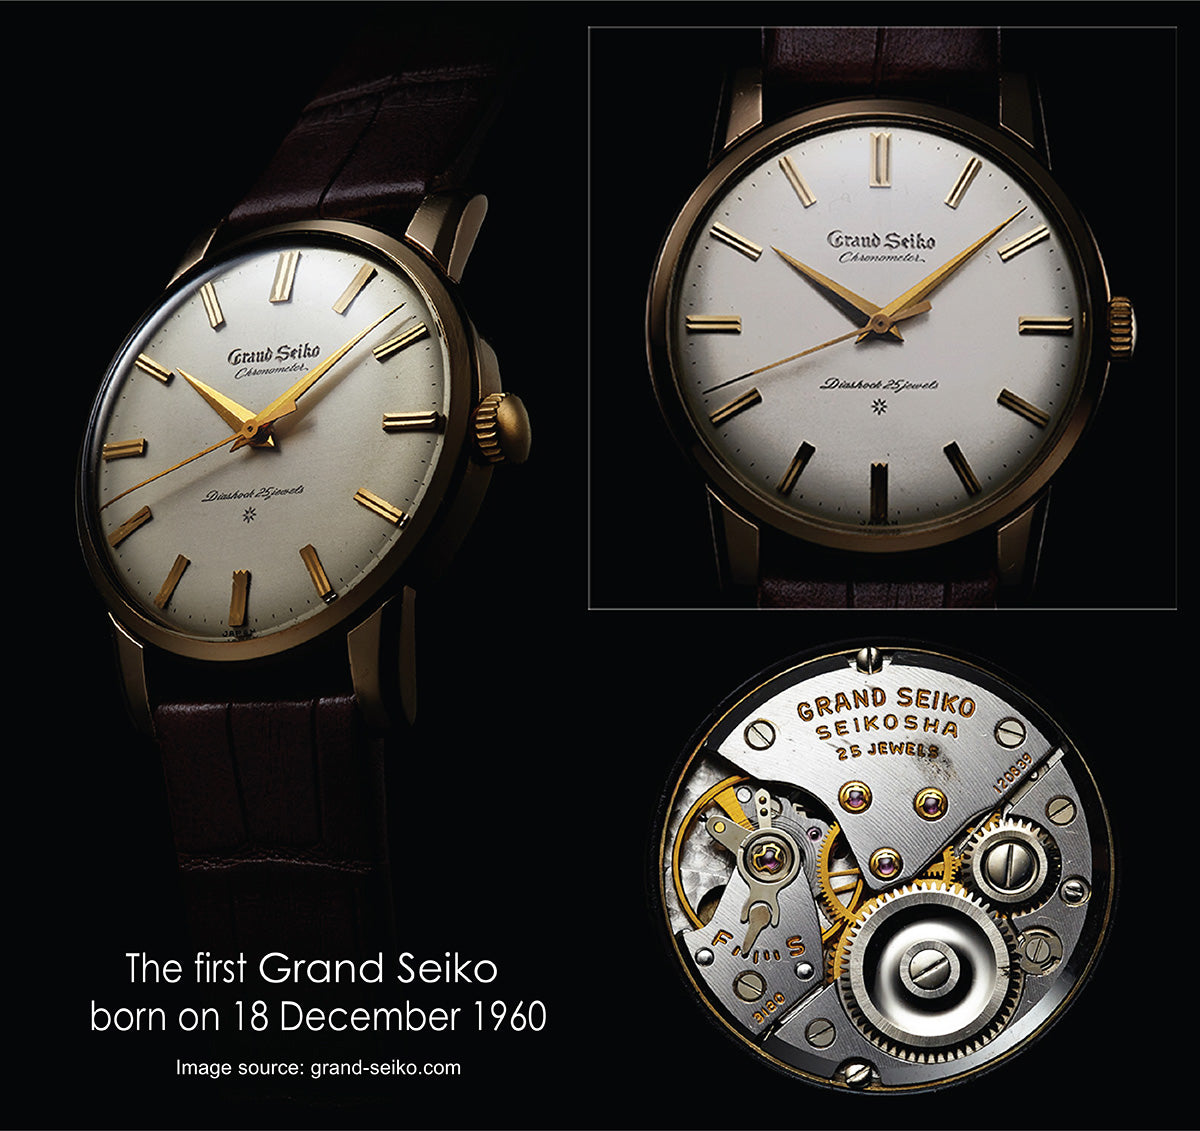 The first Grand Seiko born on 18 December 1960